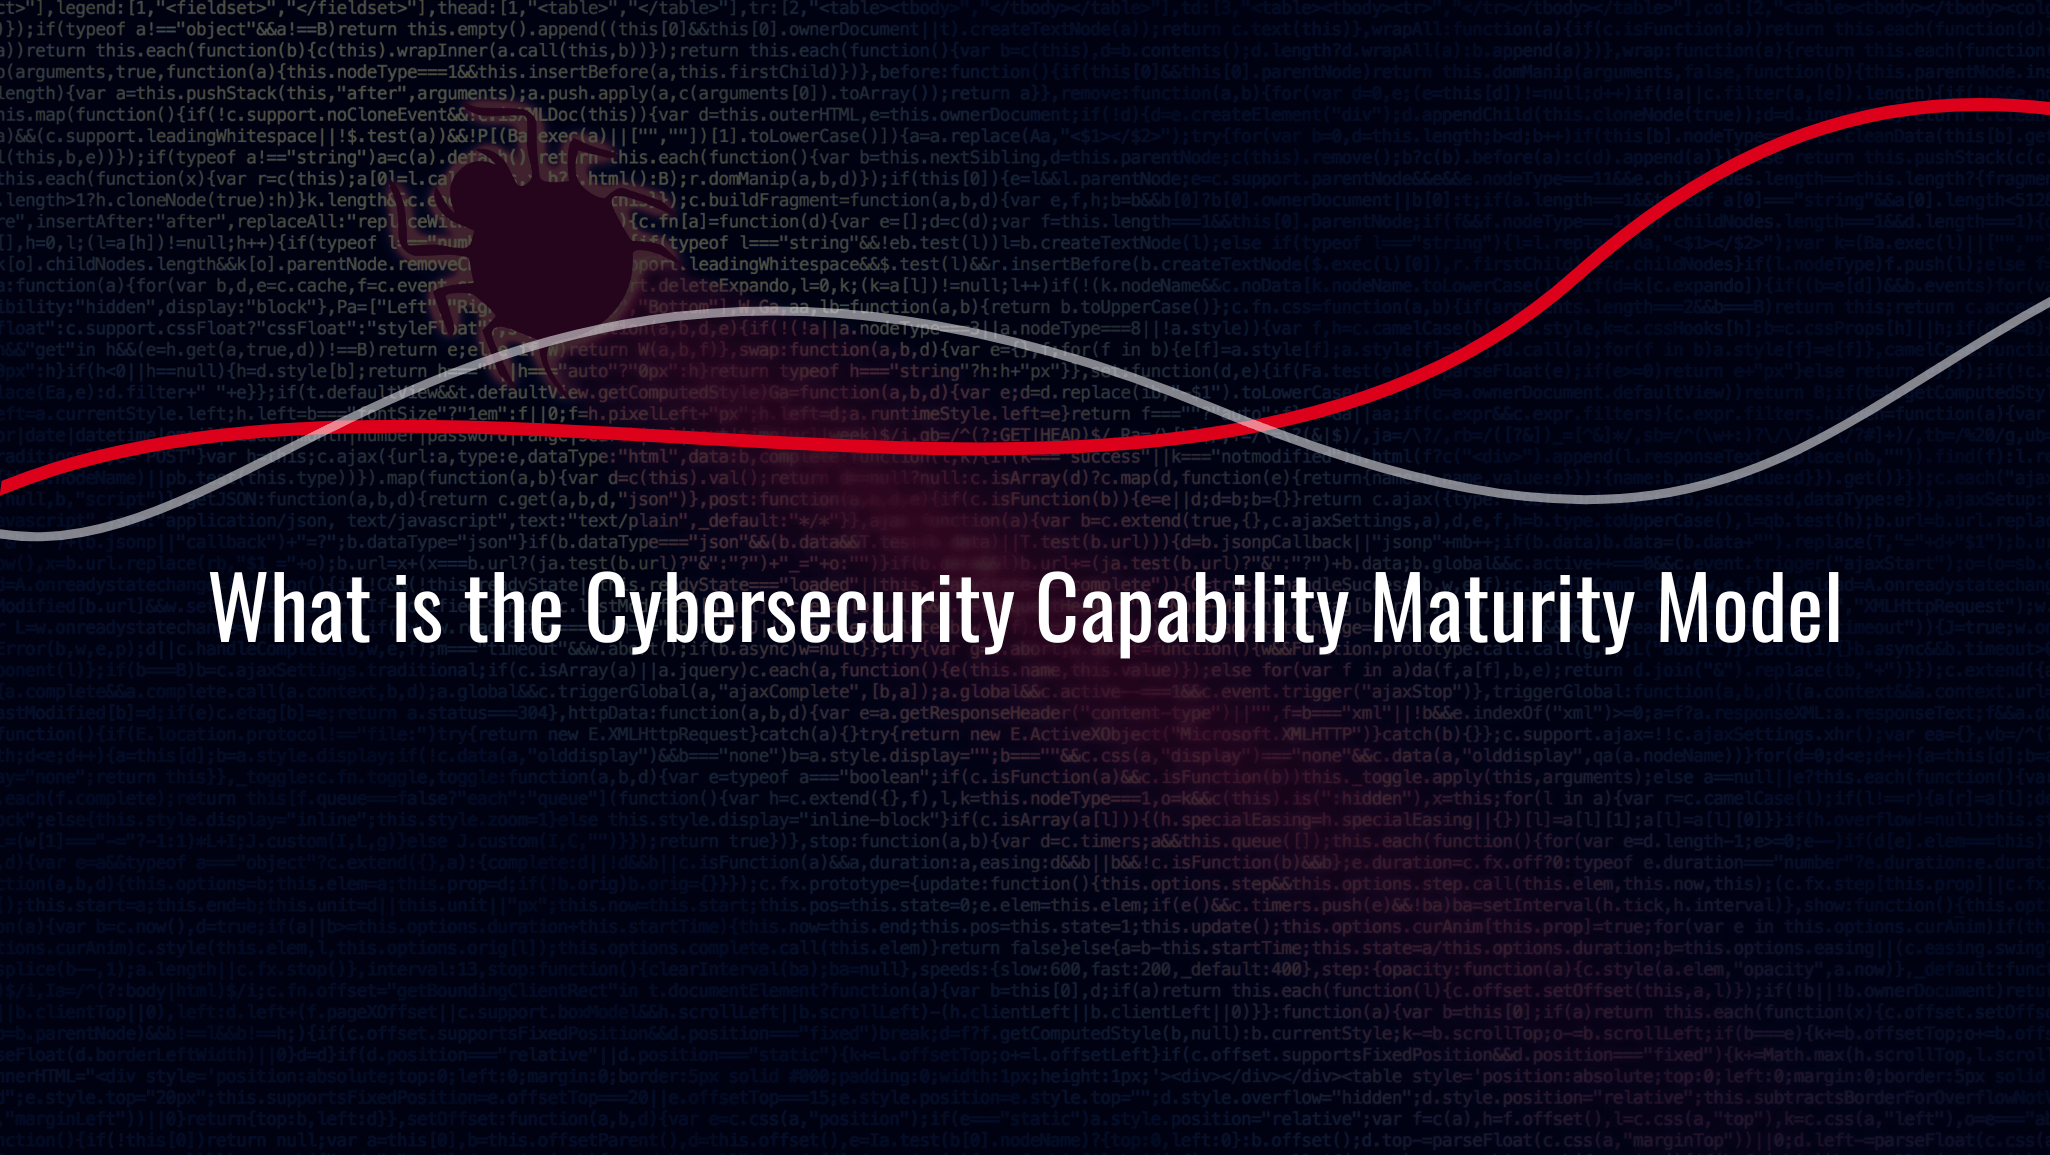 What is the Cybersecurity Capability Maturity Model